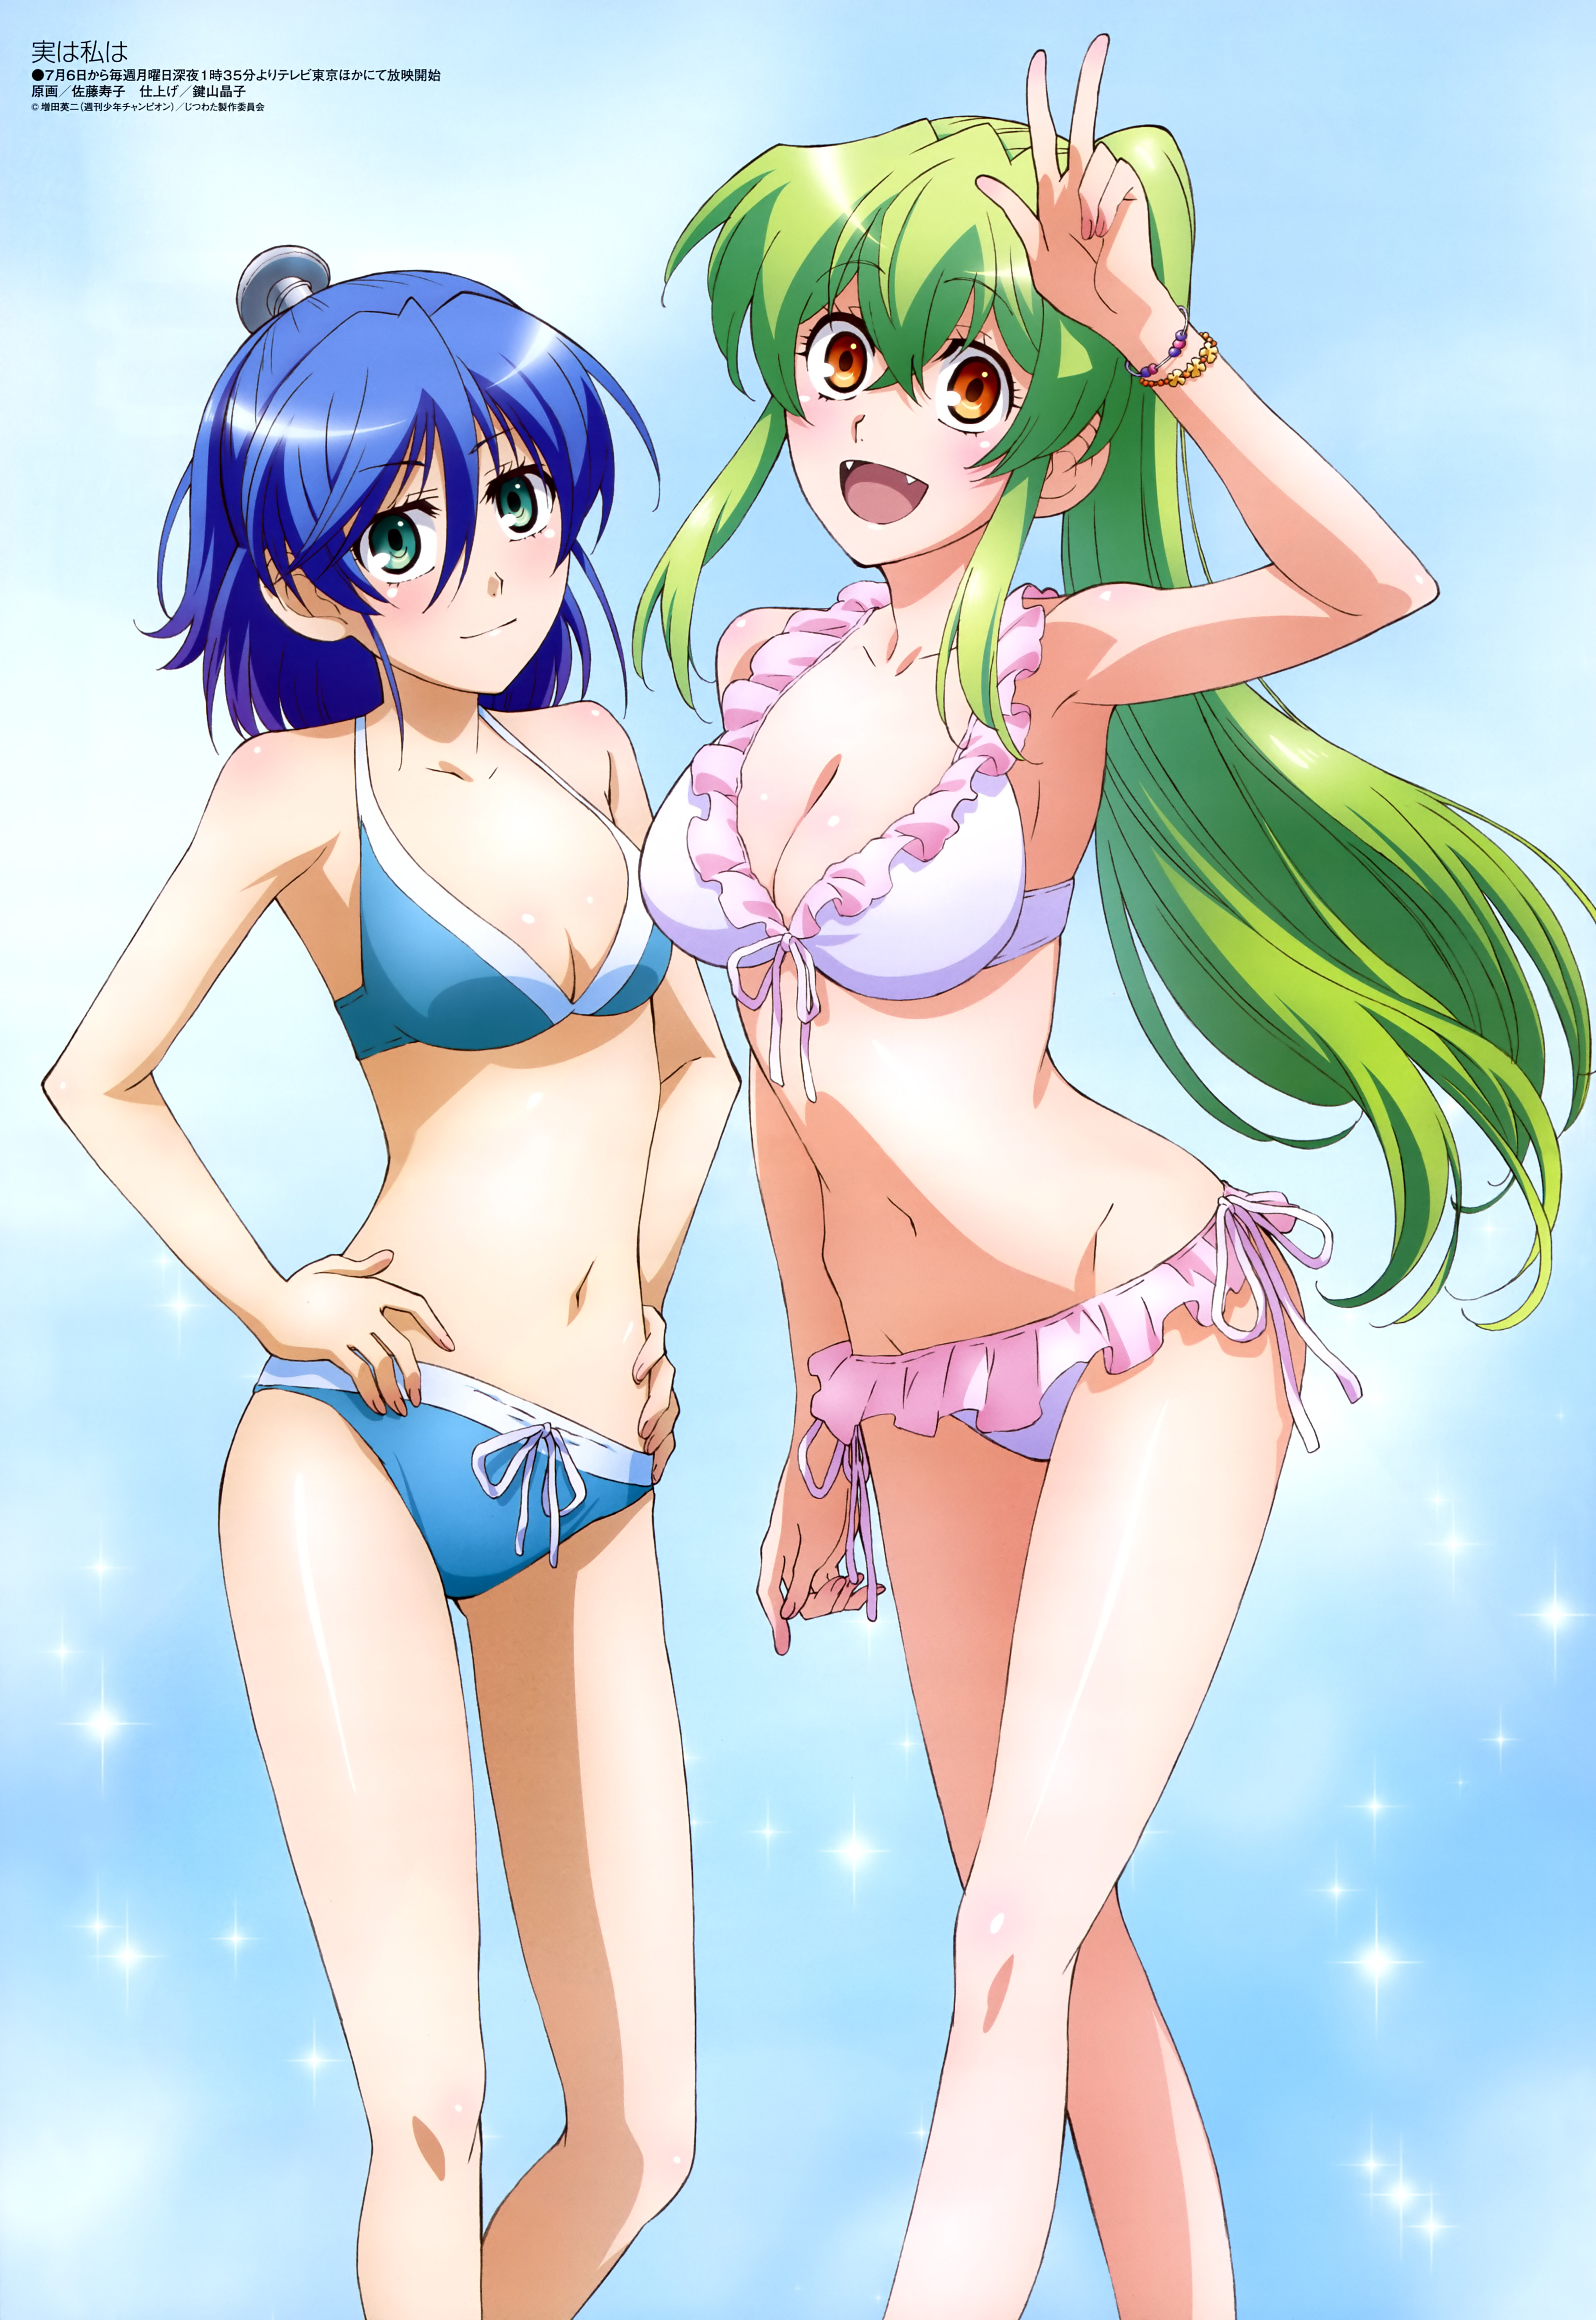 TMS Shows Off Character Designs For Vampire Comedy Jitsu wa